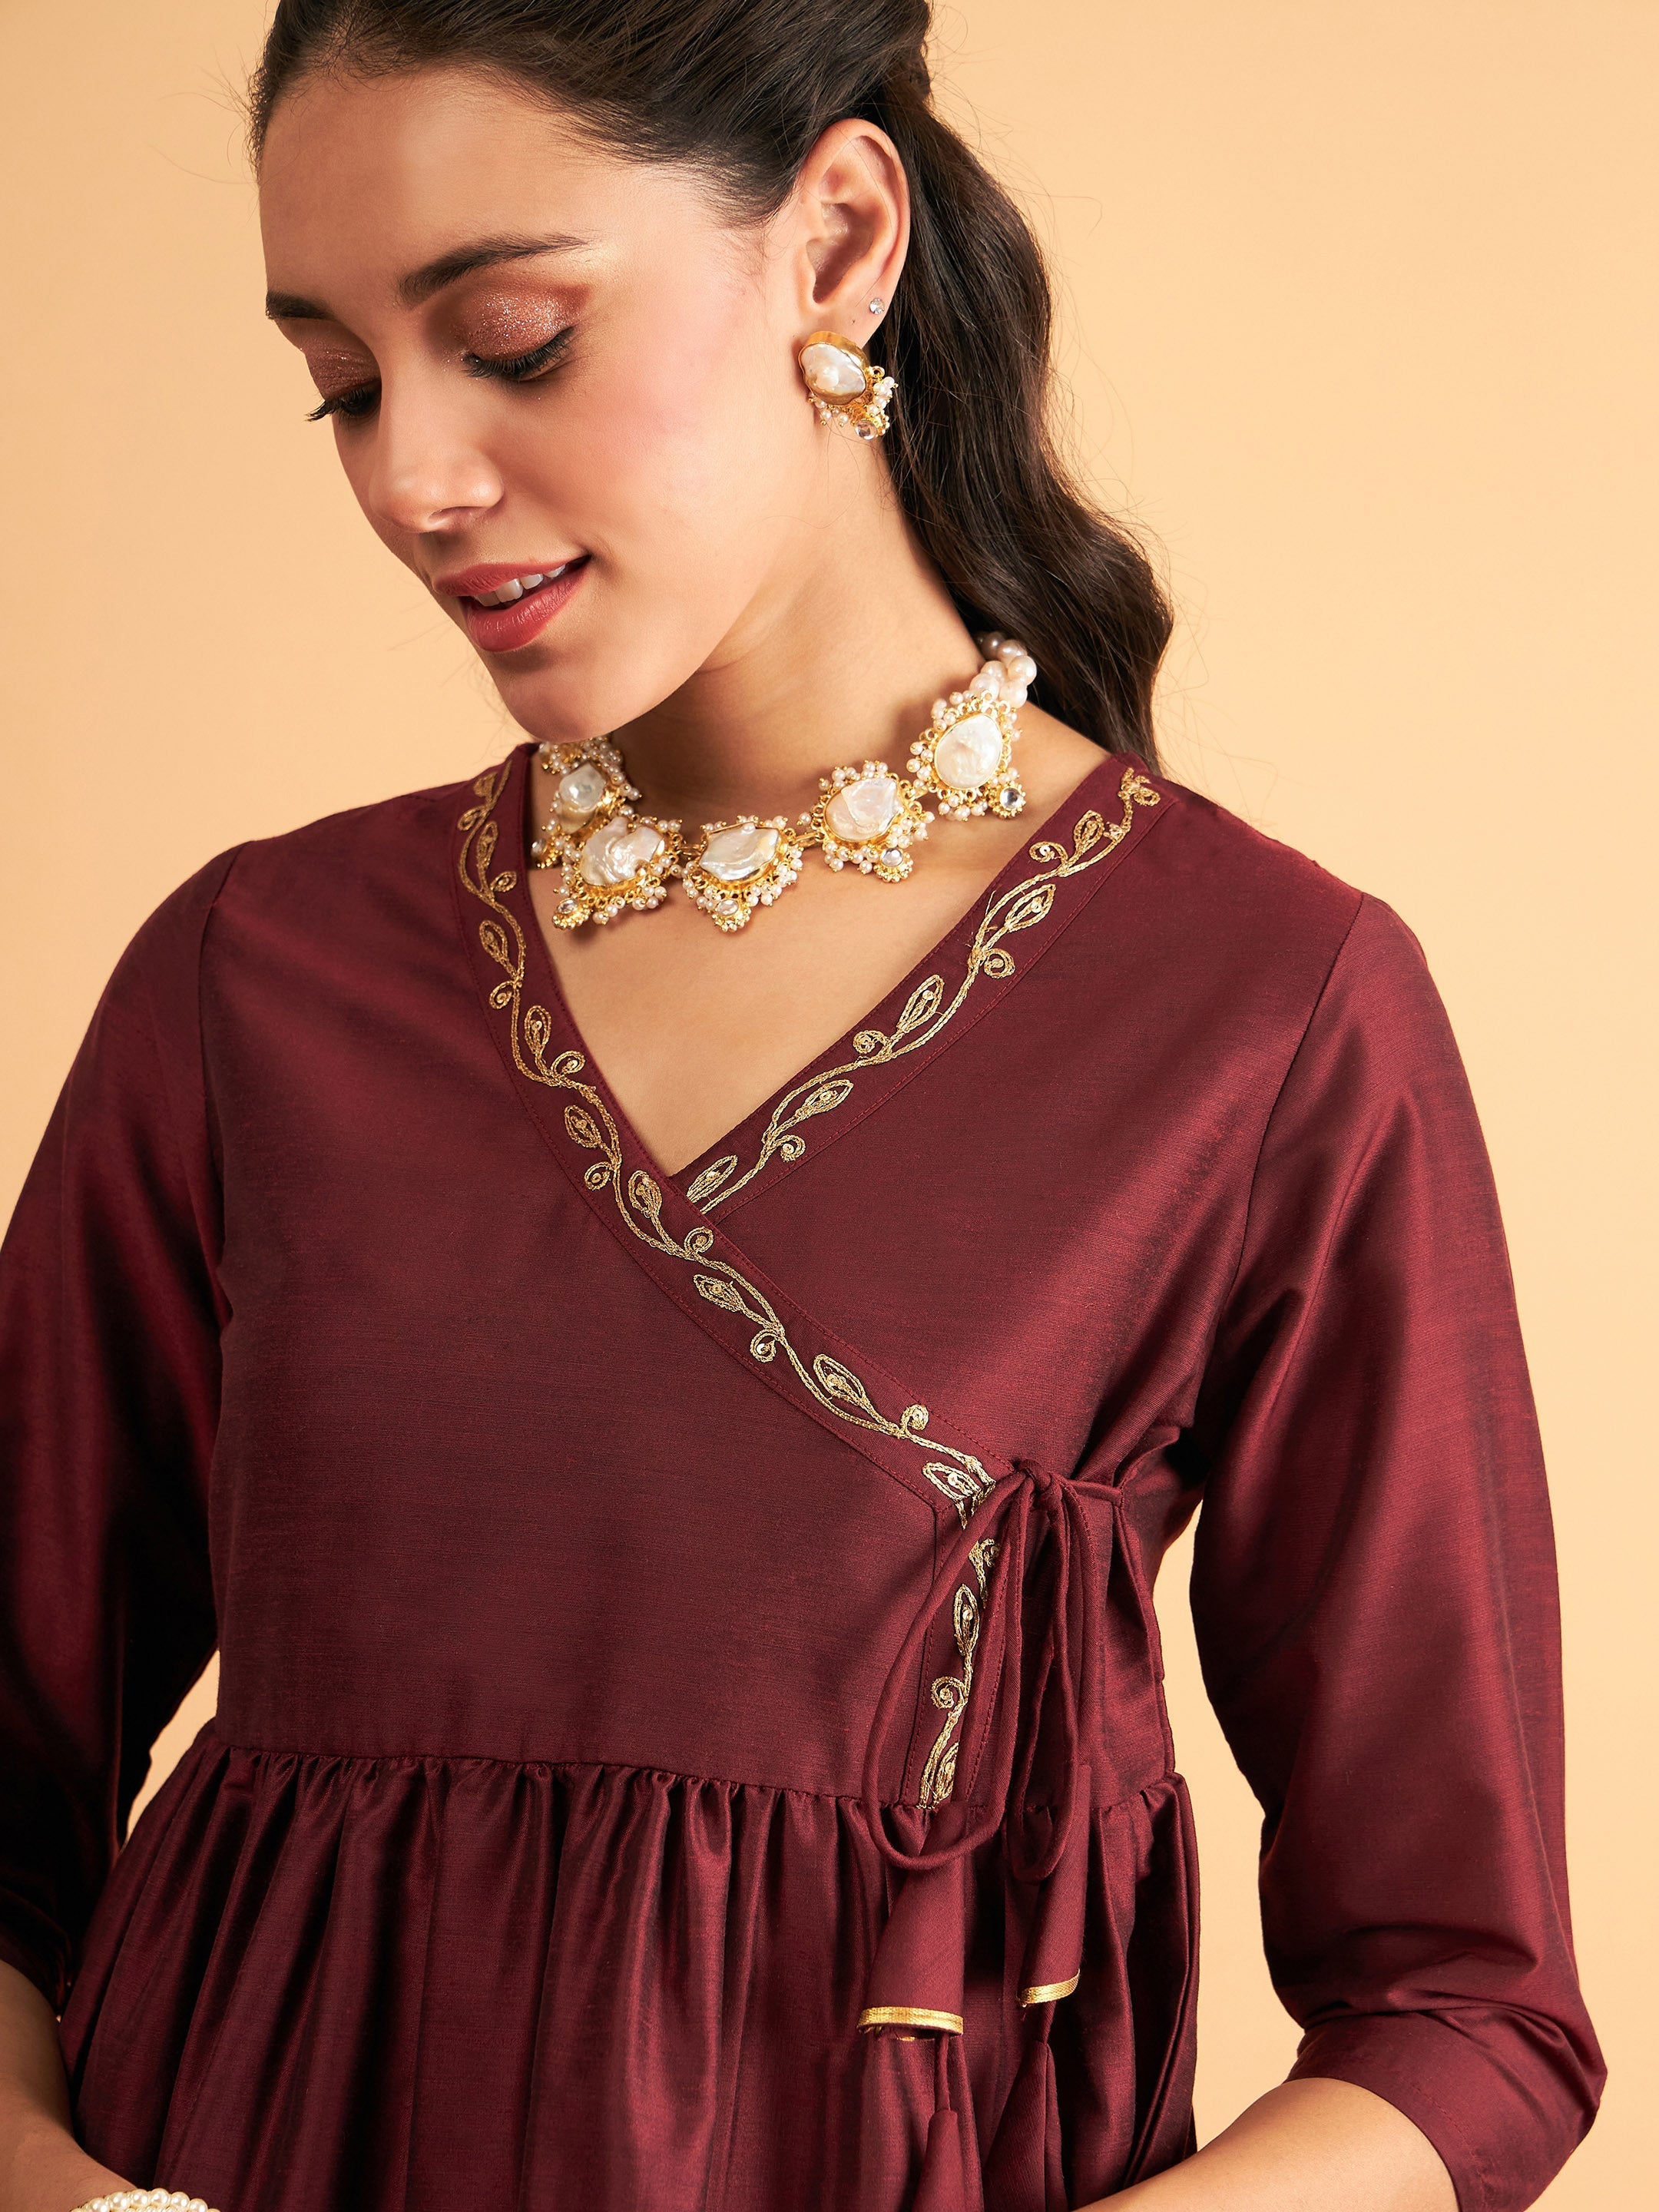 Women's Maroon Embroidered Wrap Peplum Top With Pants - Lyush